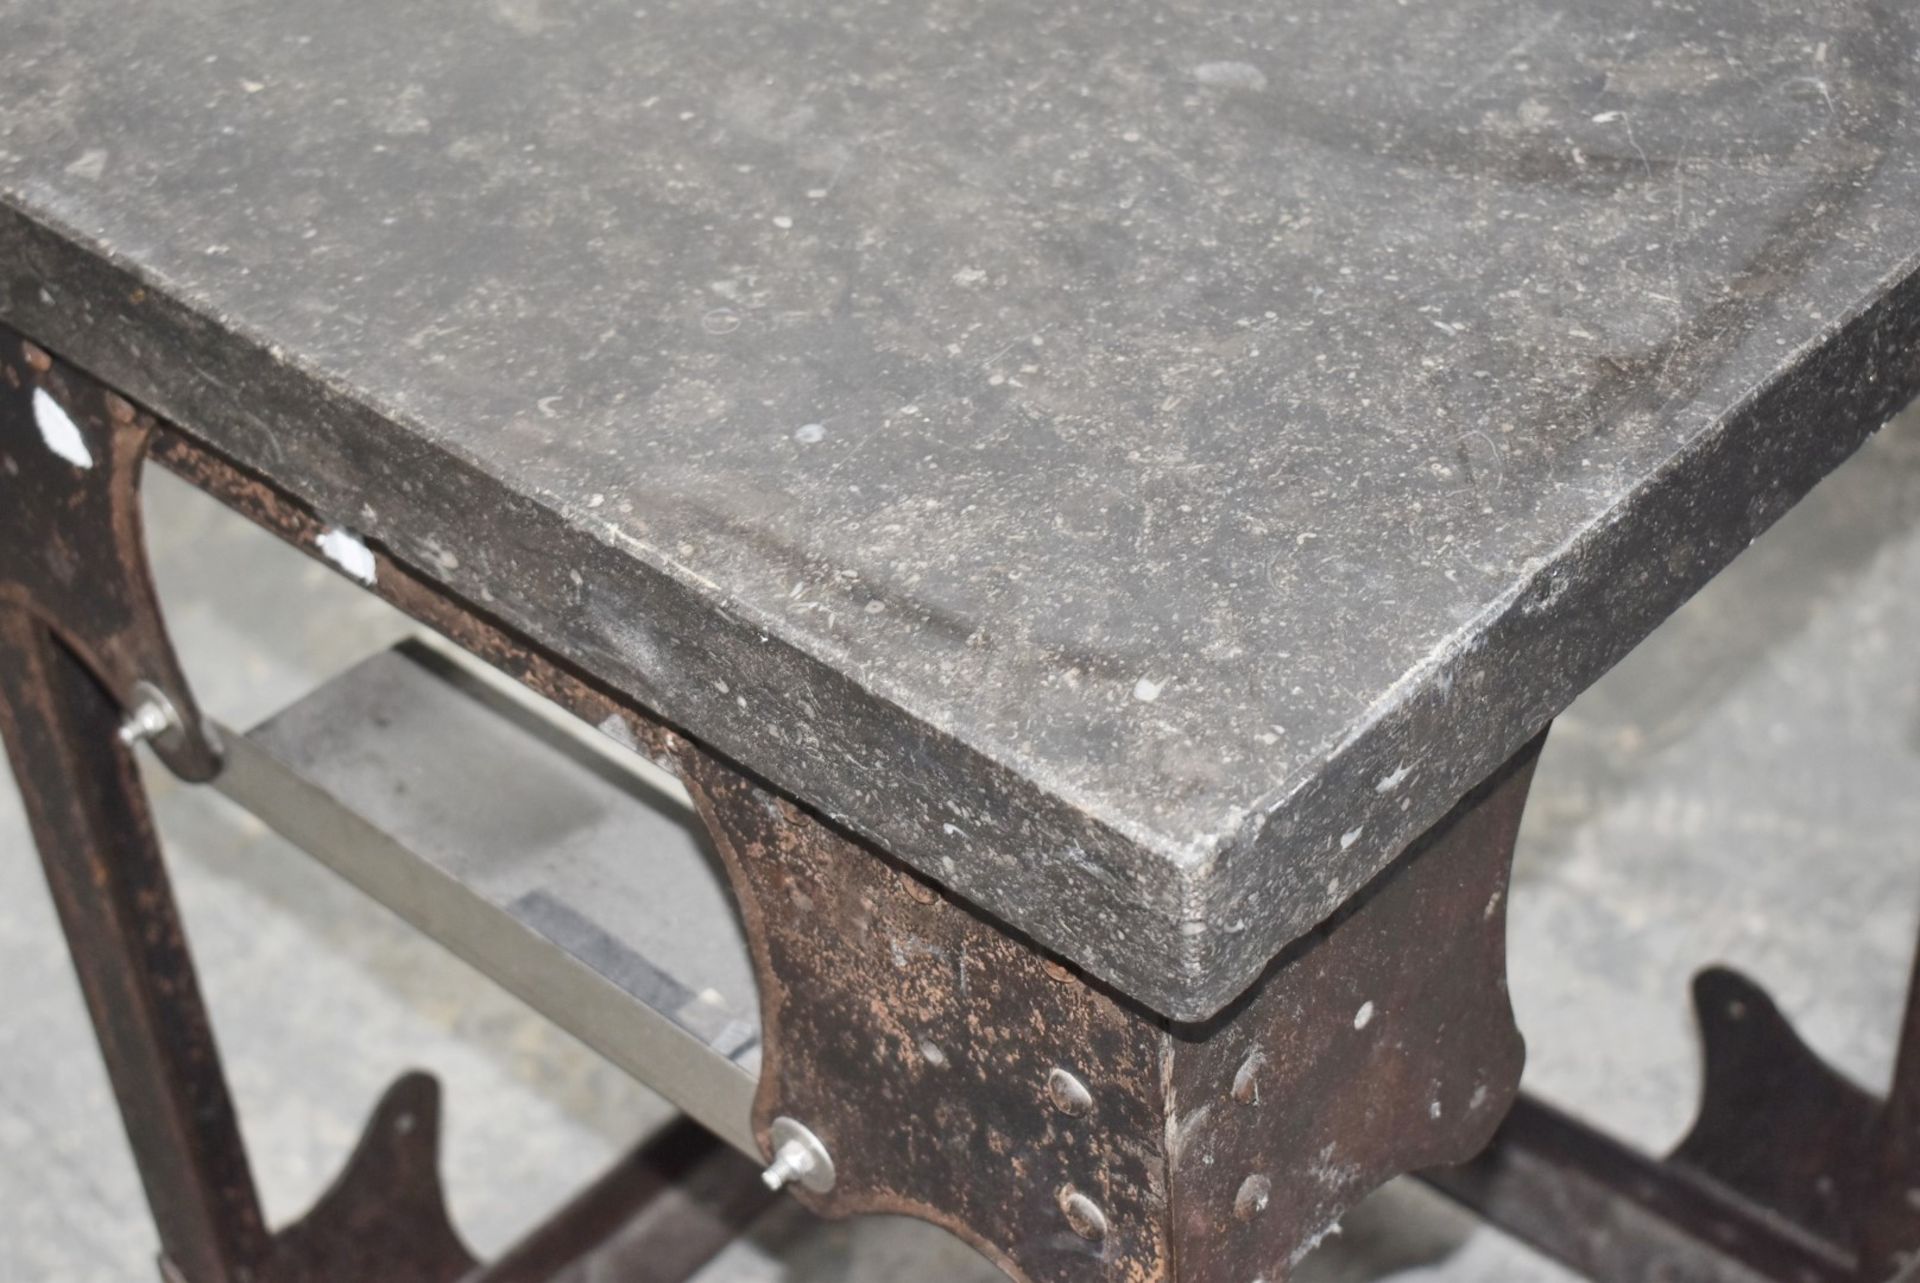 1 x Vintage Butchers Block With Riveted Steel Base, Utensil Hanging Rail and Heavy Stone Block Top - Image 4 of 11